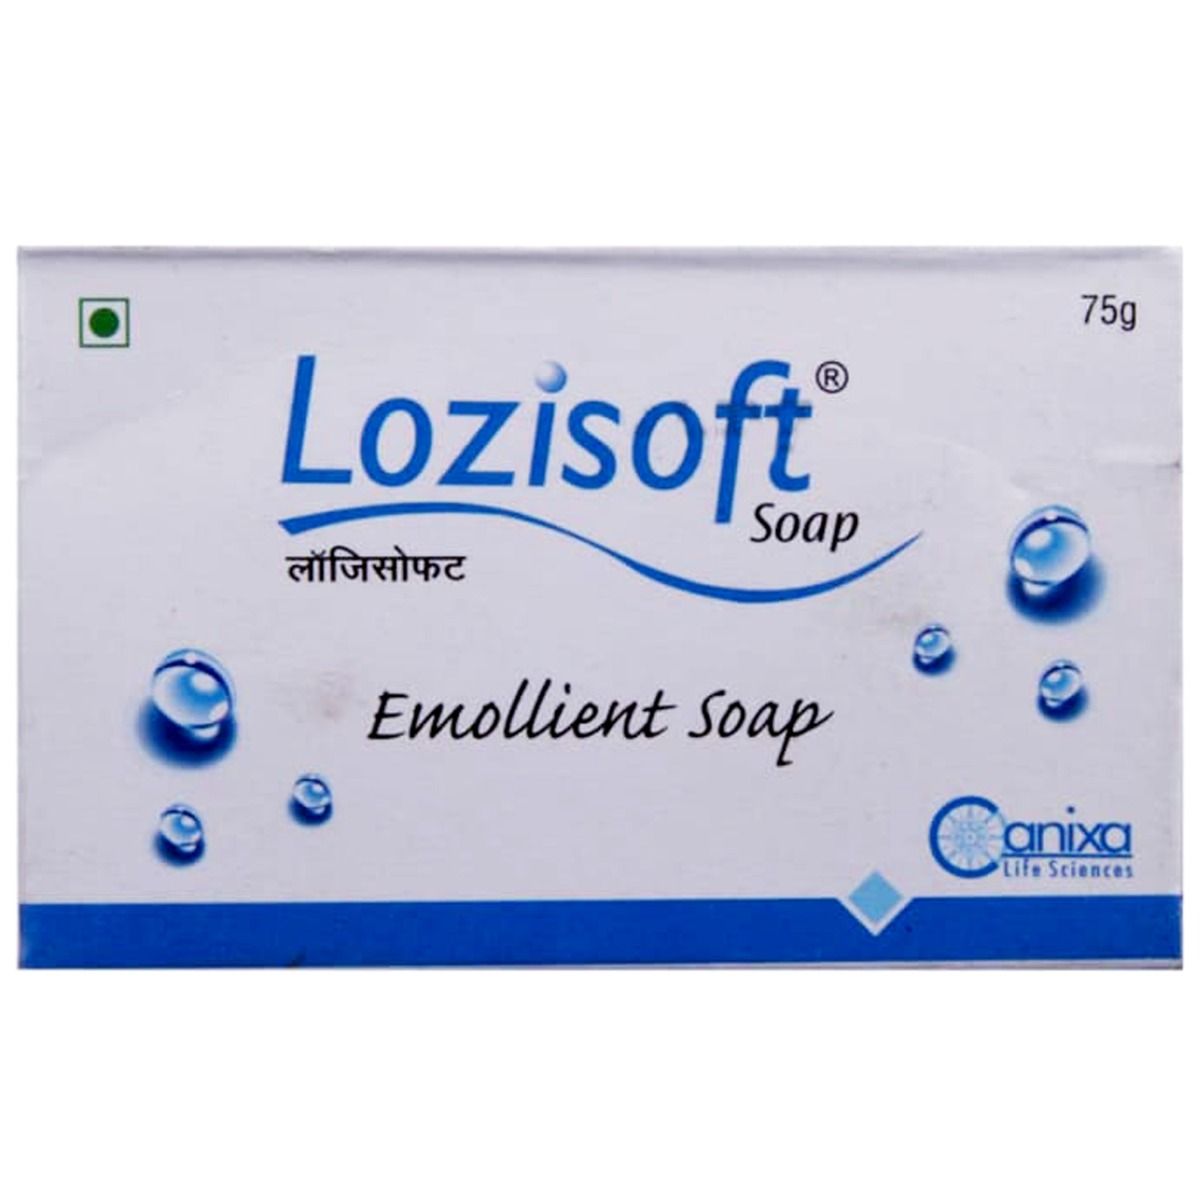 Lozisoft Soap,75 gm, Pack of 1 